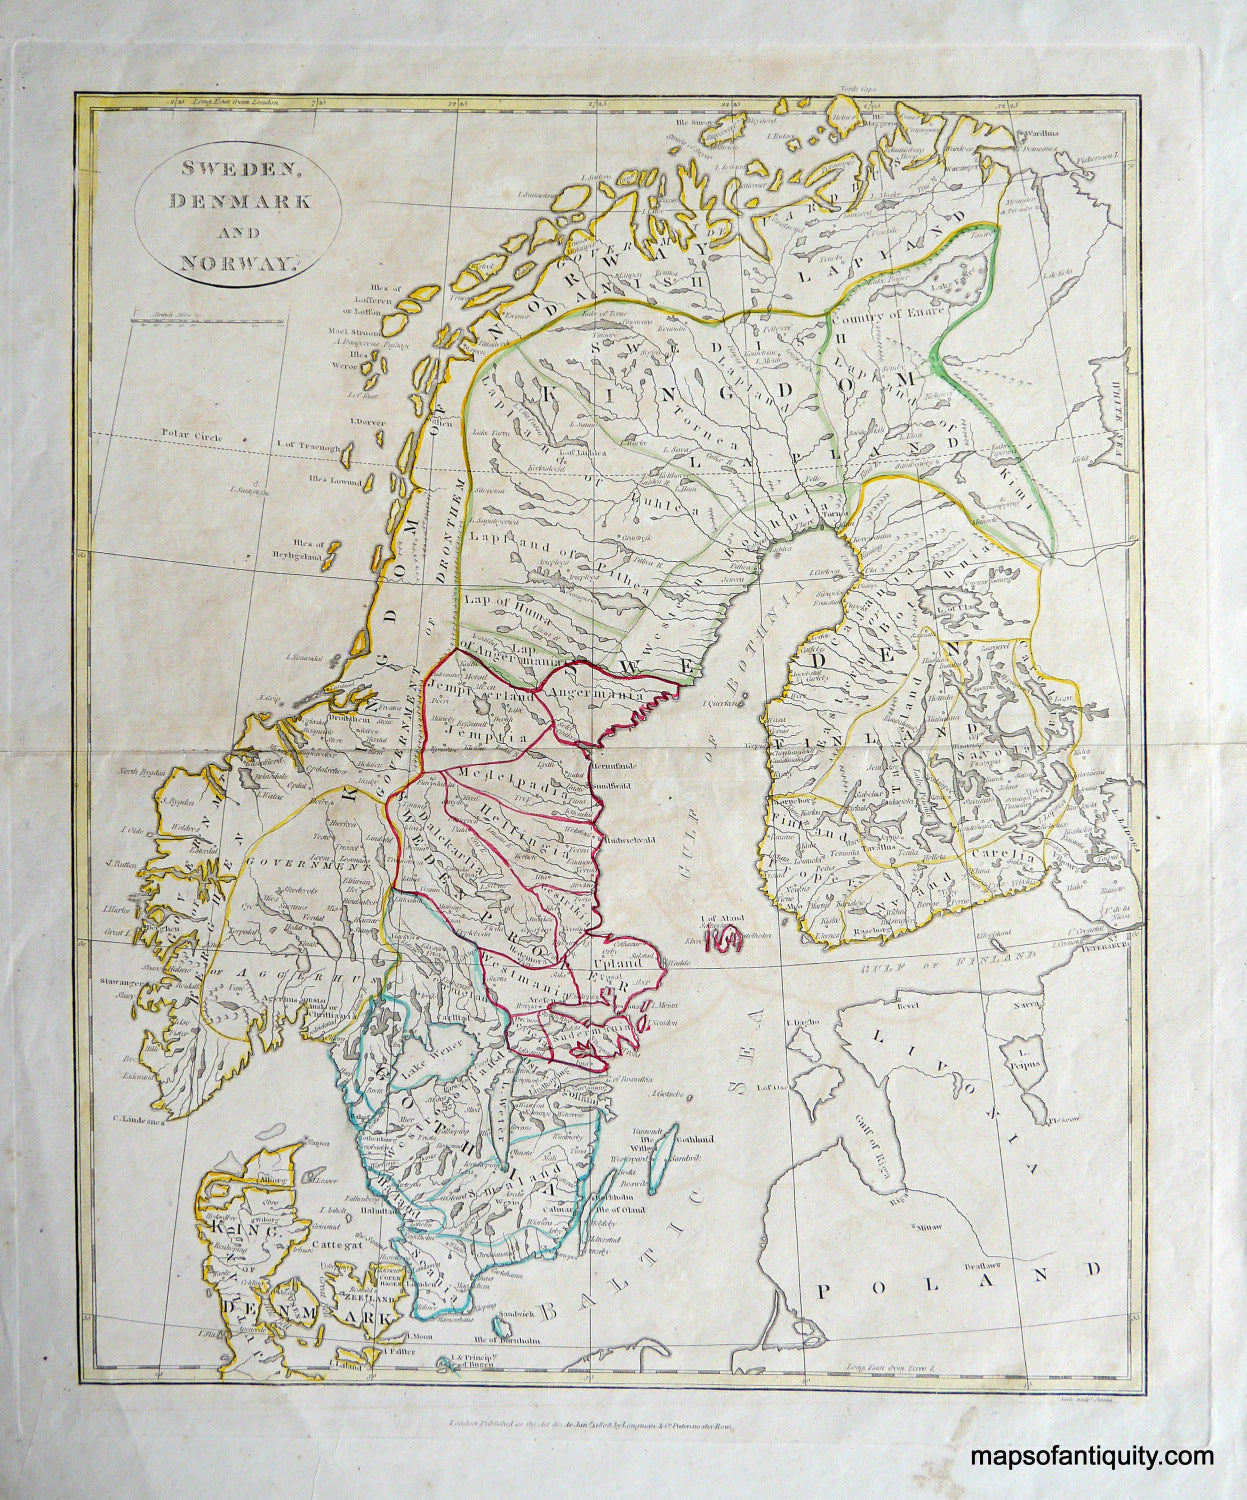 Antique-Hand-Colored-Map-Sweden-Denmark-and-Norway-Europe-Scandinavia-1808-Longman-Maps-Of-Antiquity